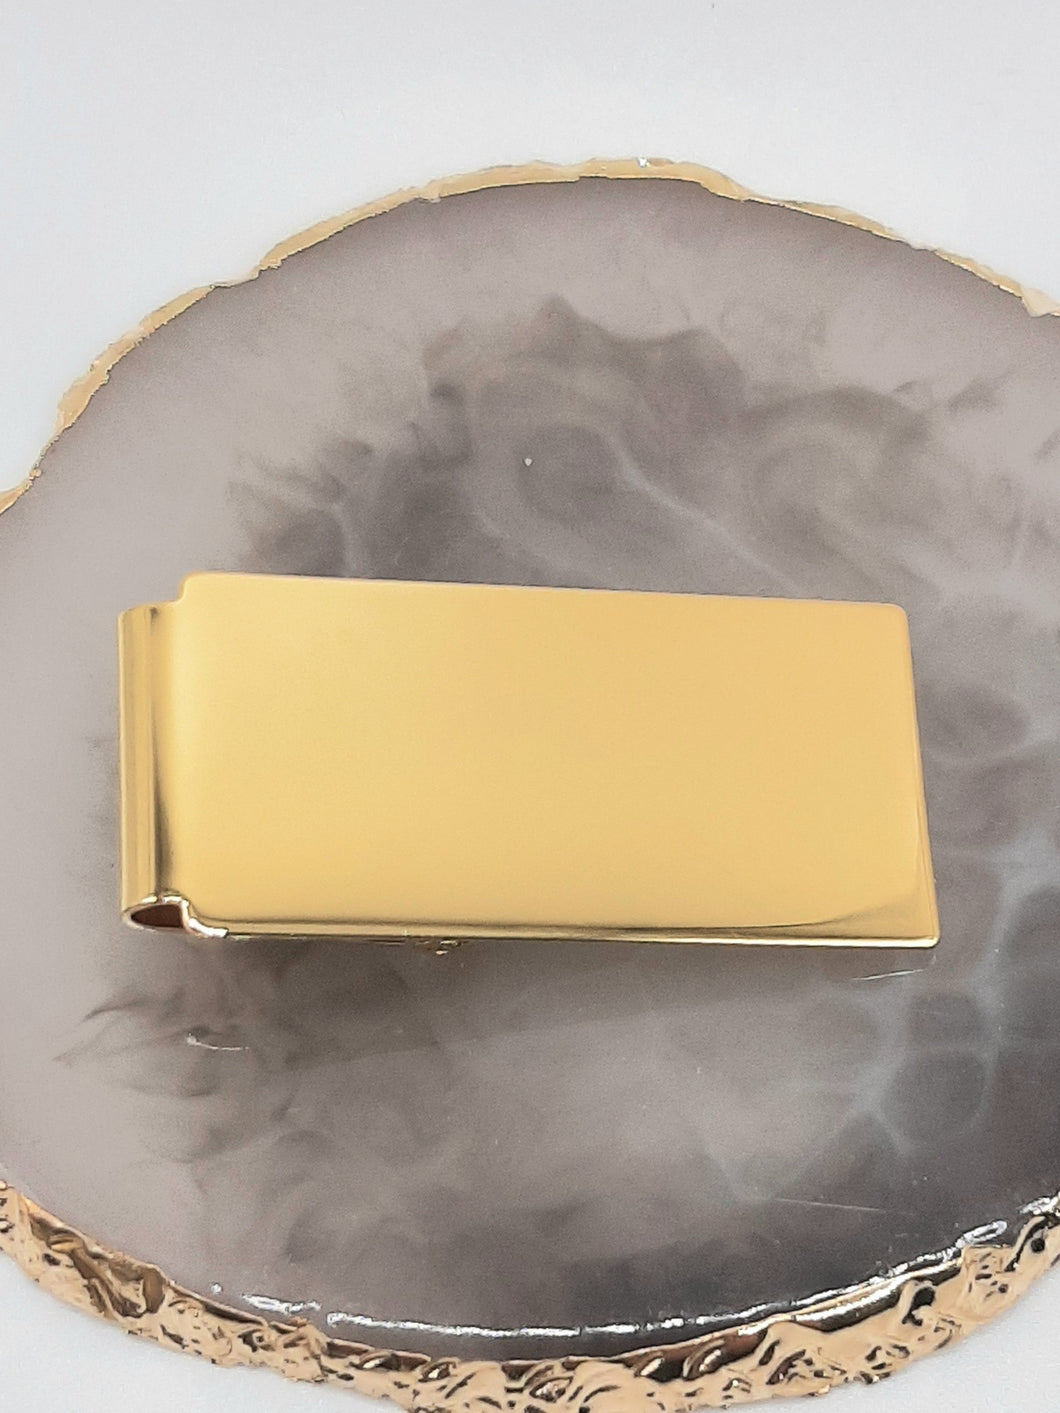 Gold Plated Hinged Money Clip Featuring High Polish